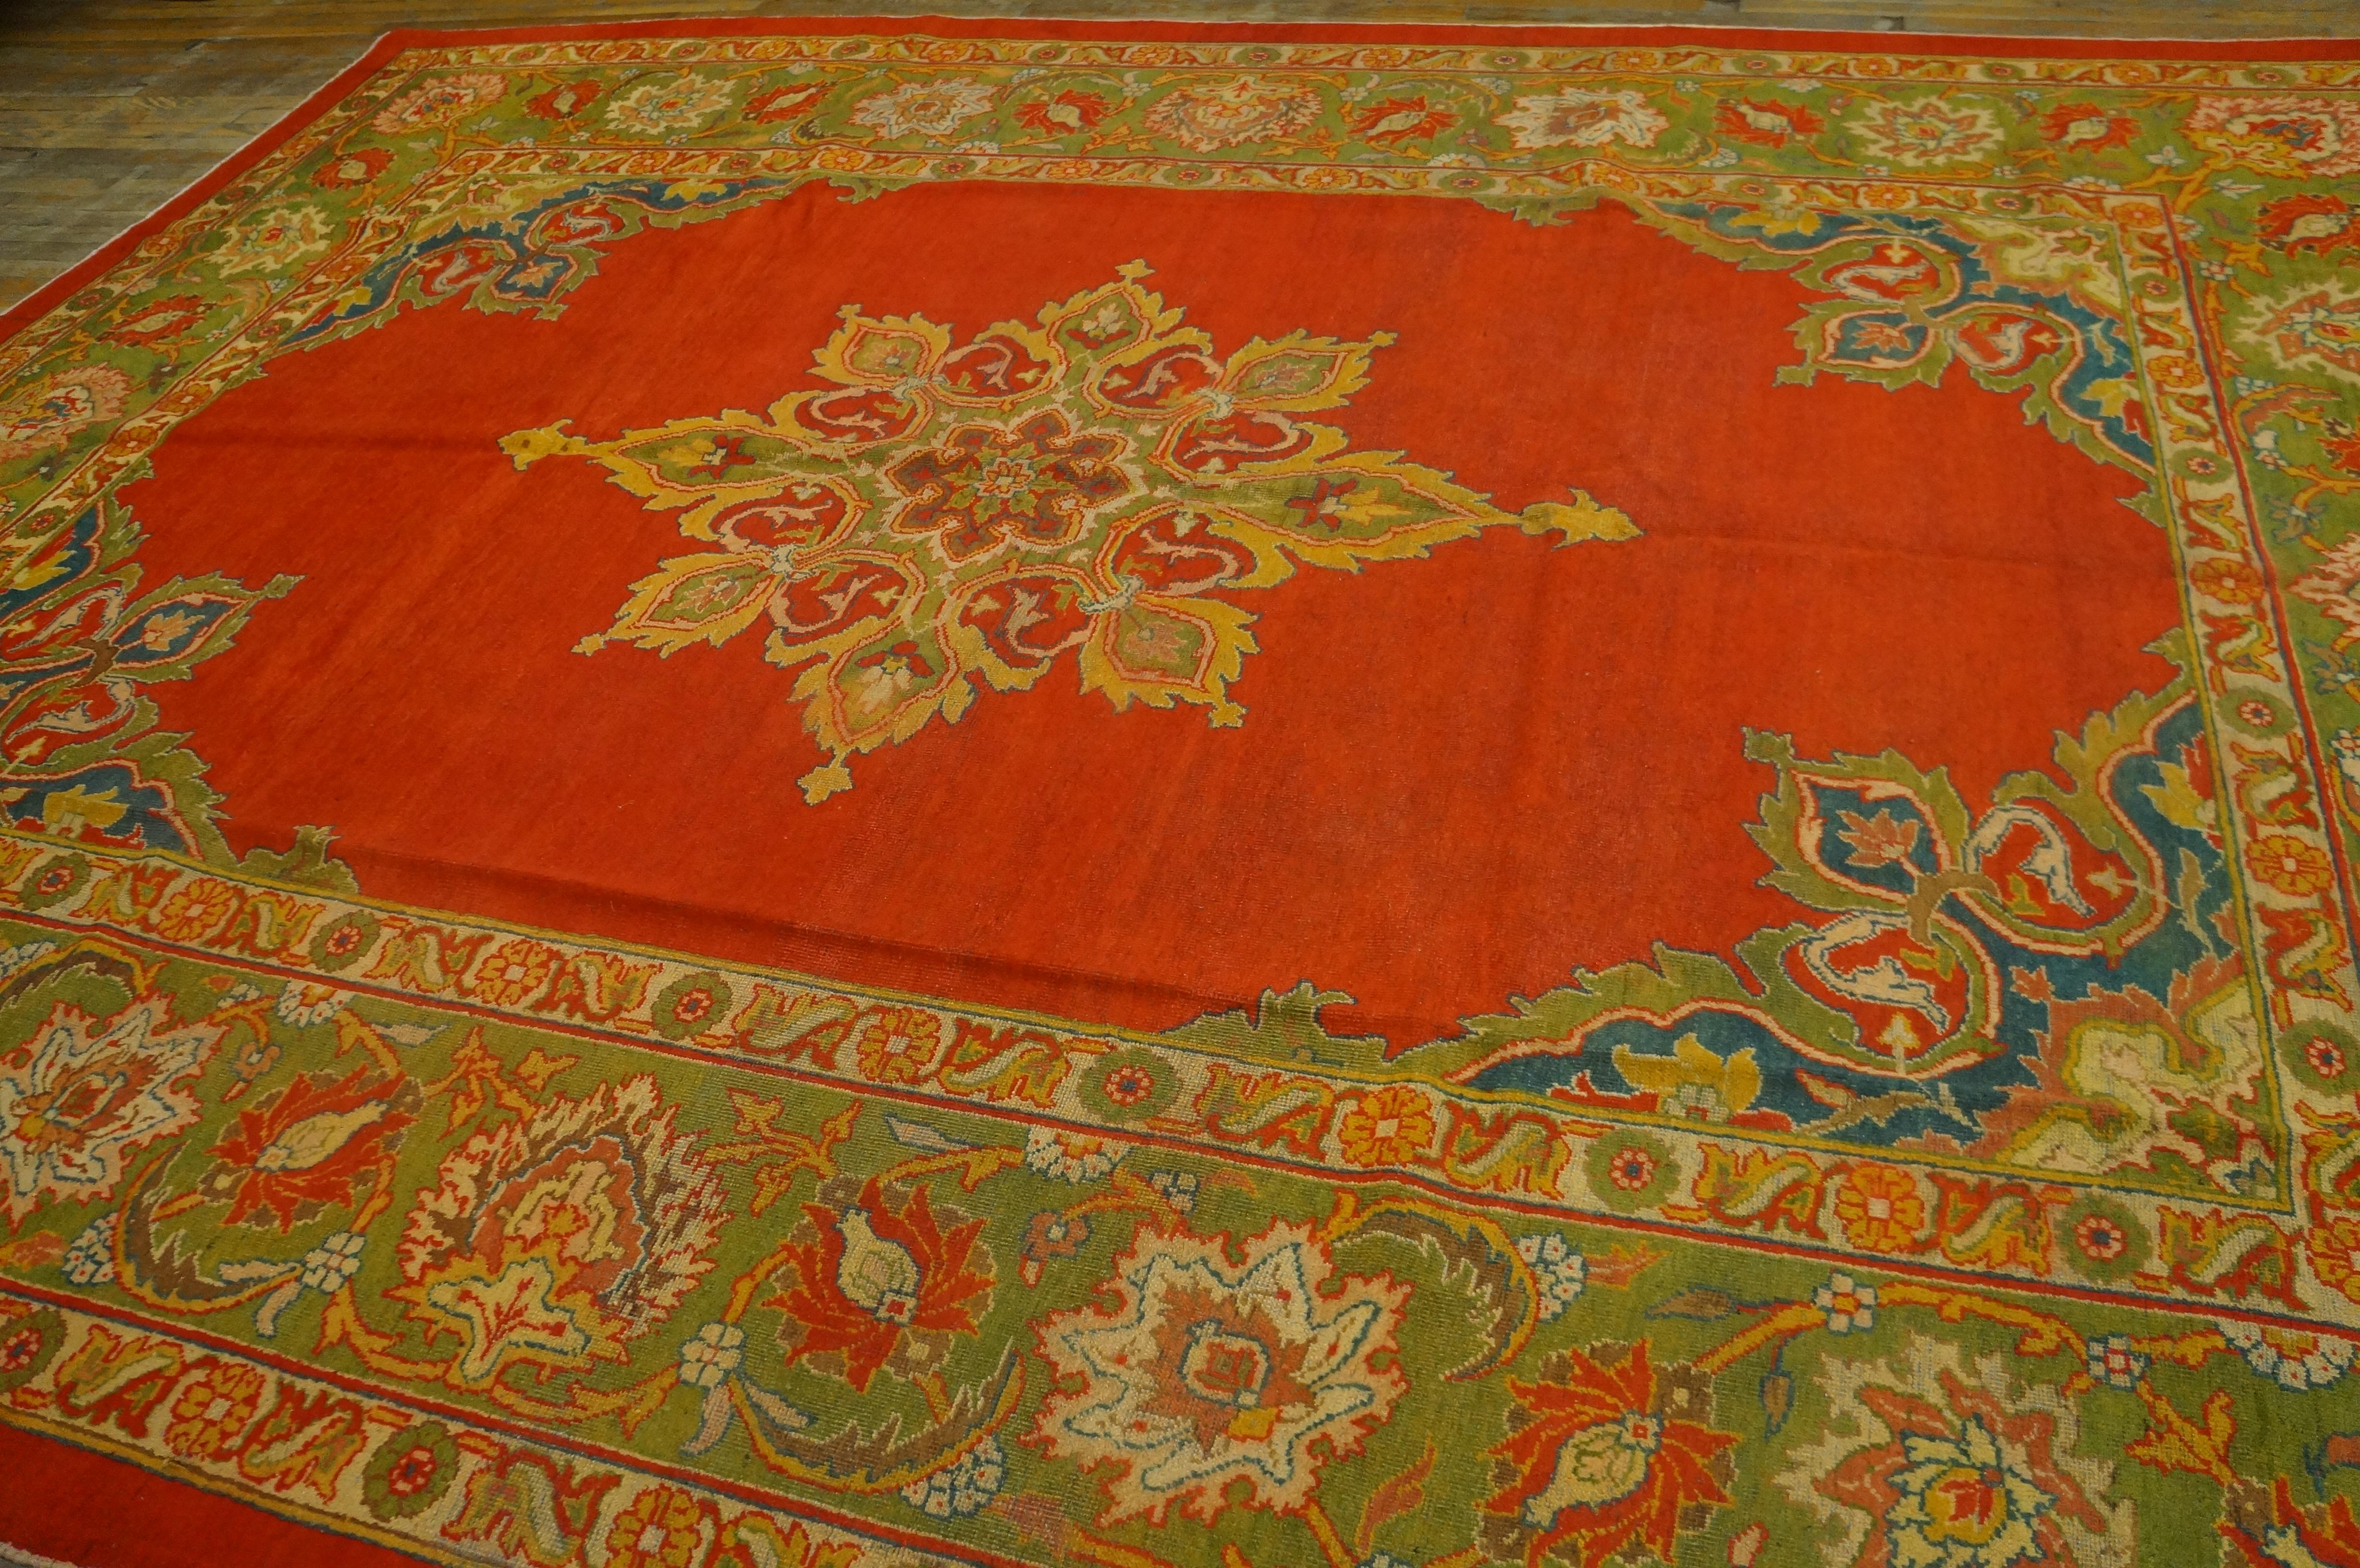 Hand-Knotted Early 20th Century N. Indian Amritsar Carpet ( 9' x 12' - 275 x 365 ) For Sale